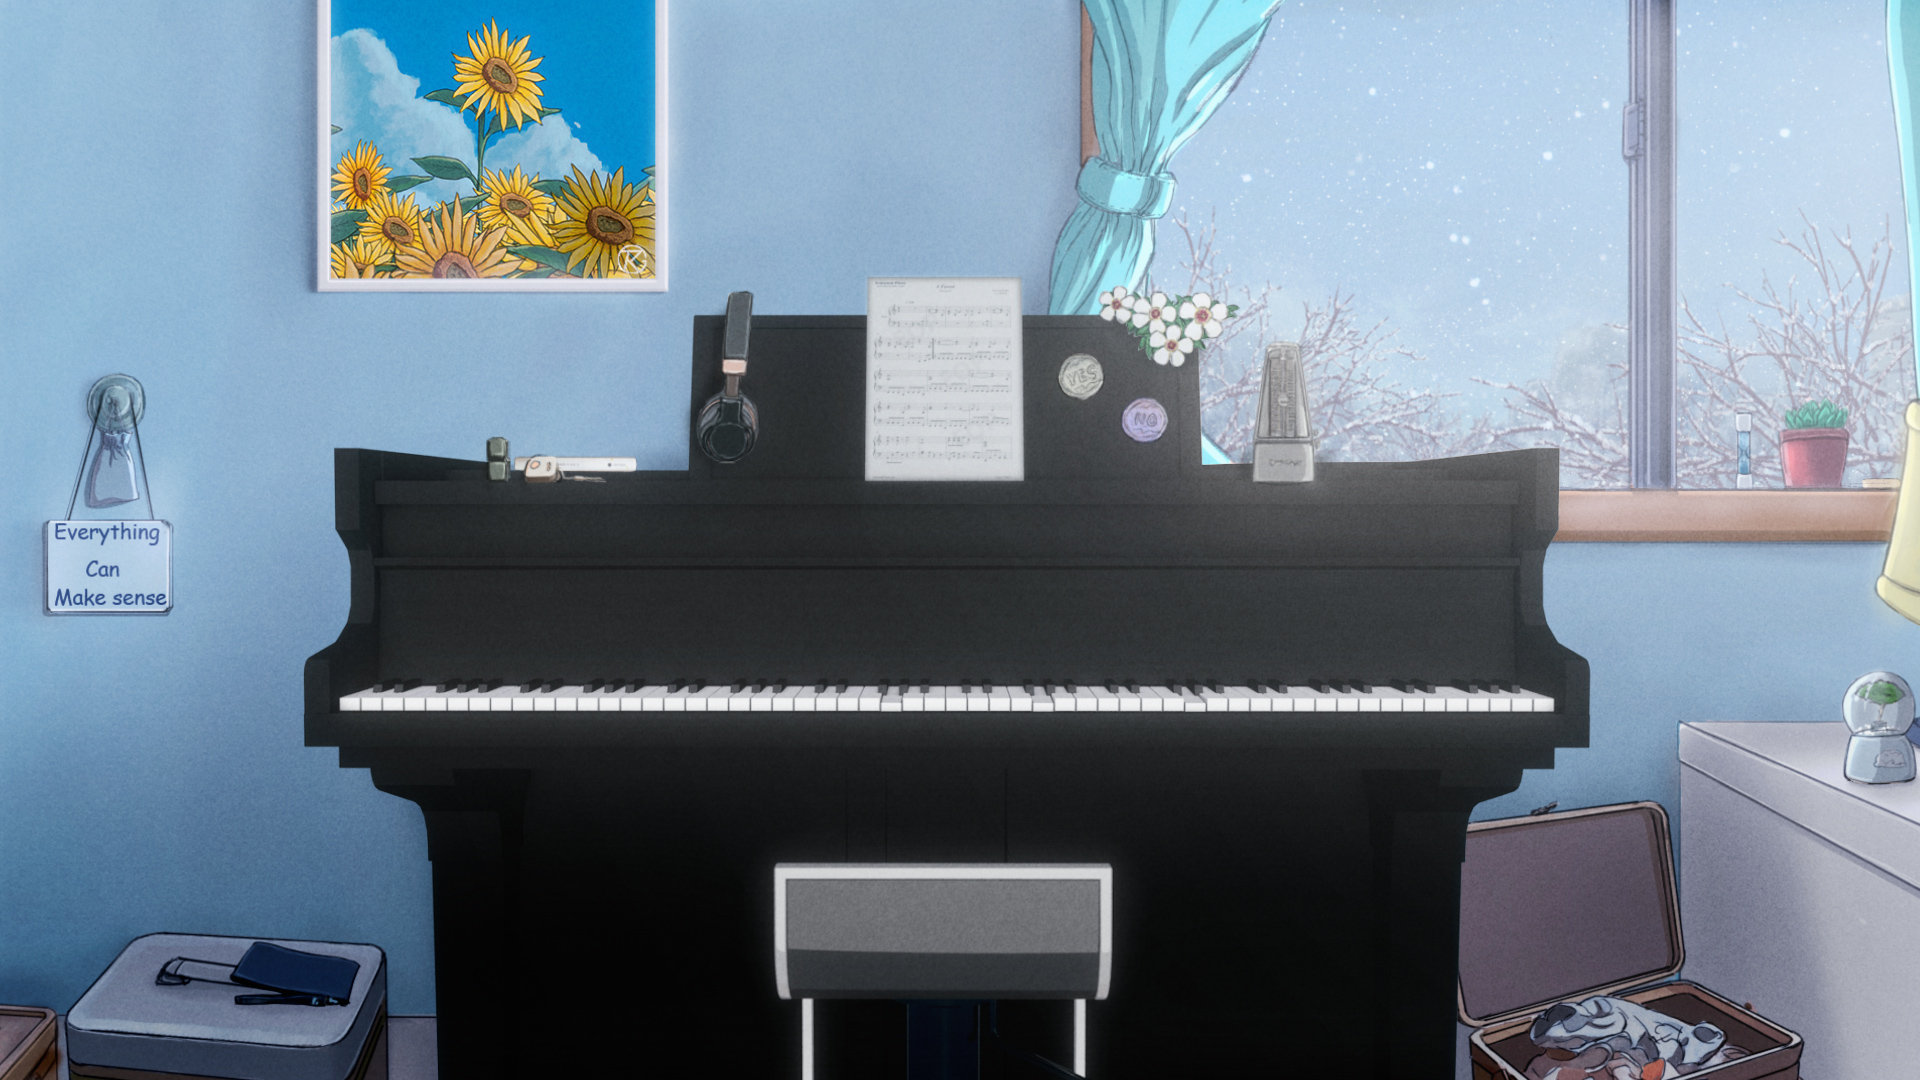 Digital Art Anime Winter Snow Room Living Rooms Piano Sunflowers Picture In Picture Wardrobe 1920x1080